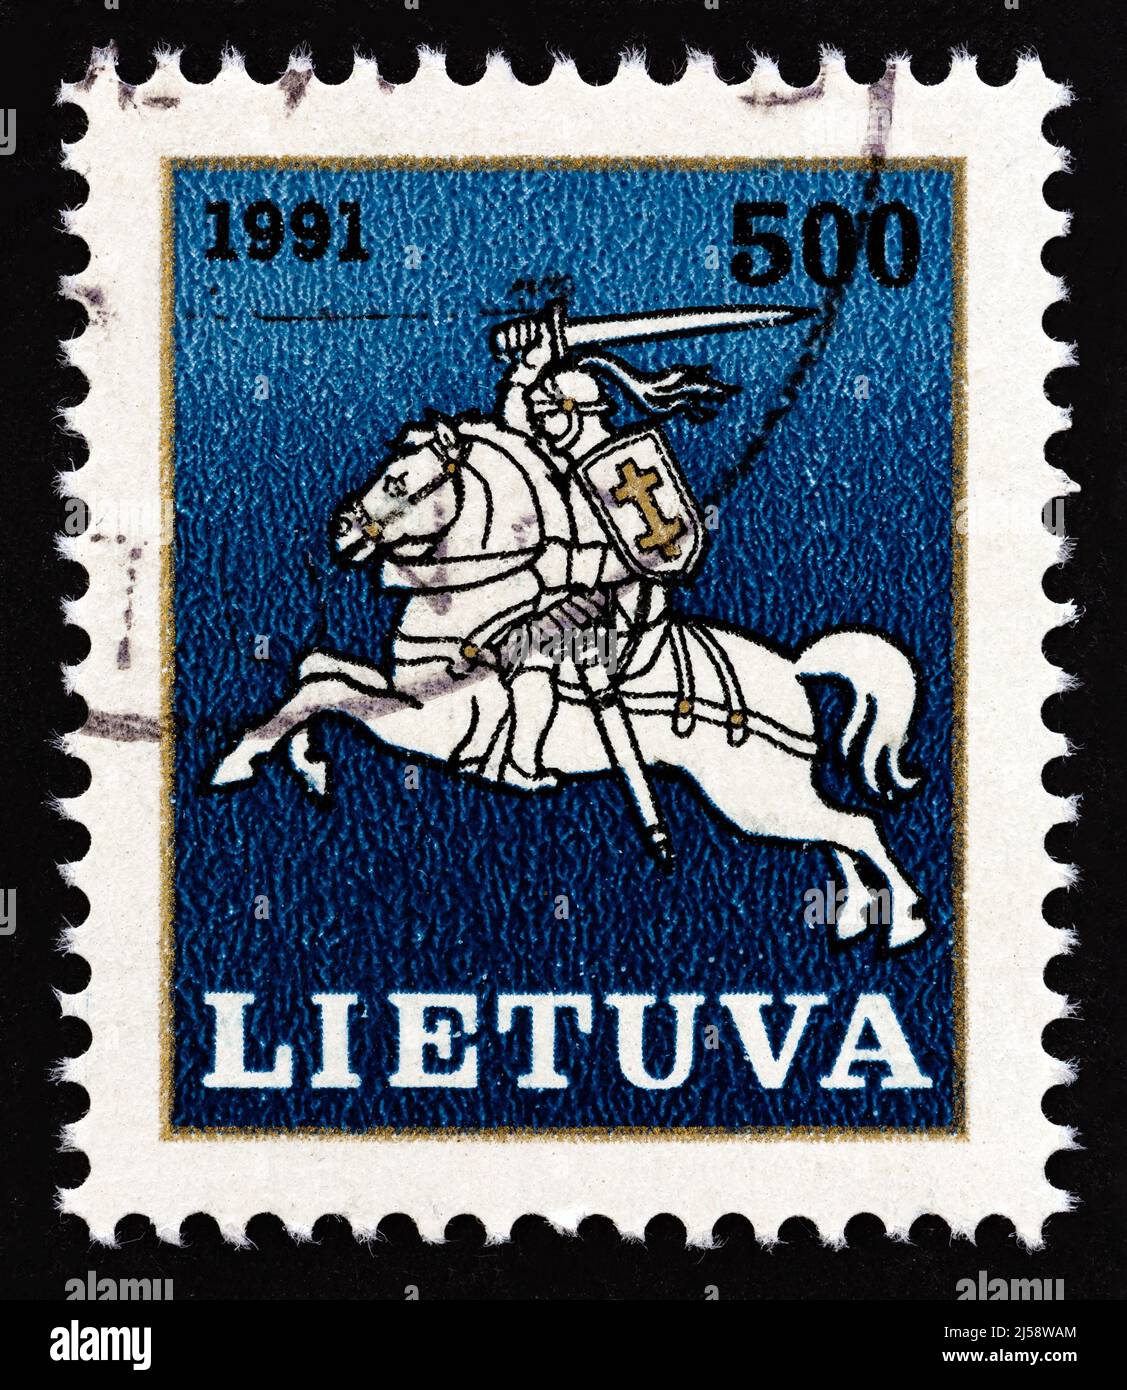 LITHUANIA - CIRCA 1991: A stamp printed in Lithuania shows state arms, Vytis, circa 1991. Stock Photo